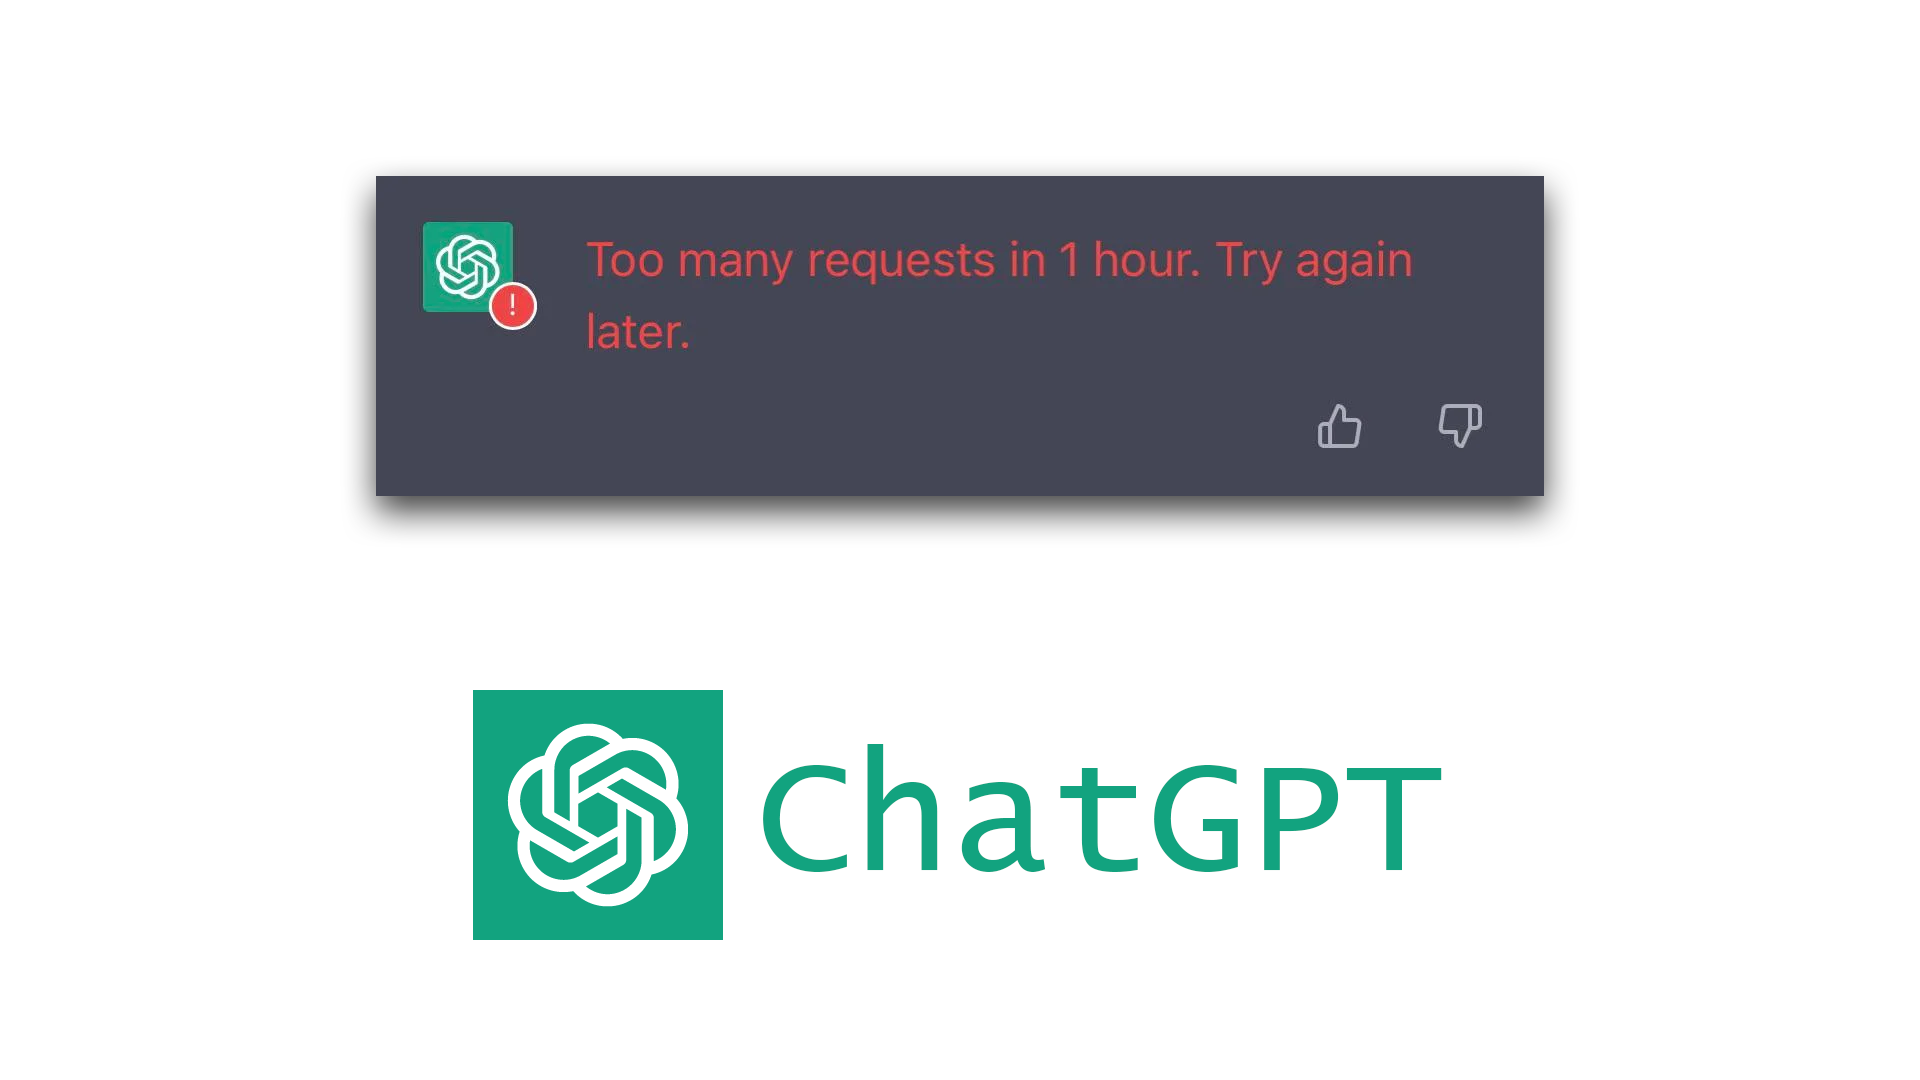 How to Fix Chat GPT Error 429